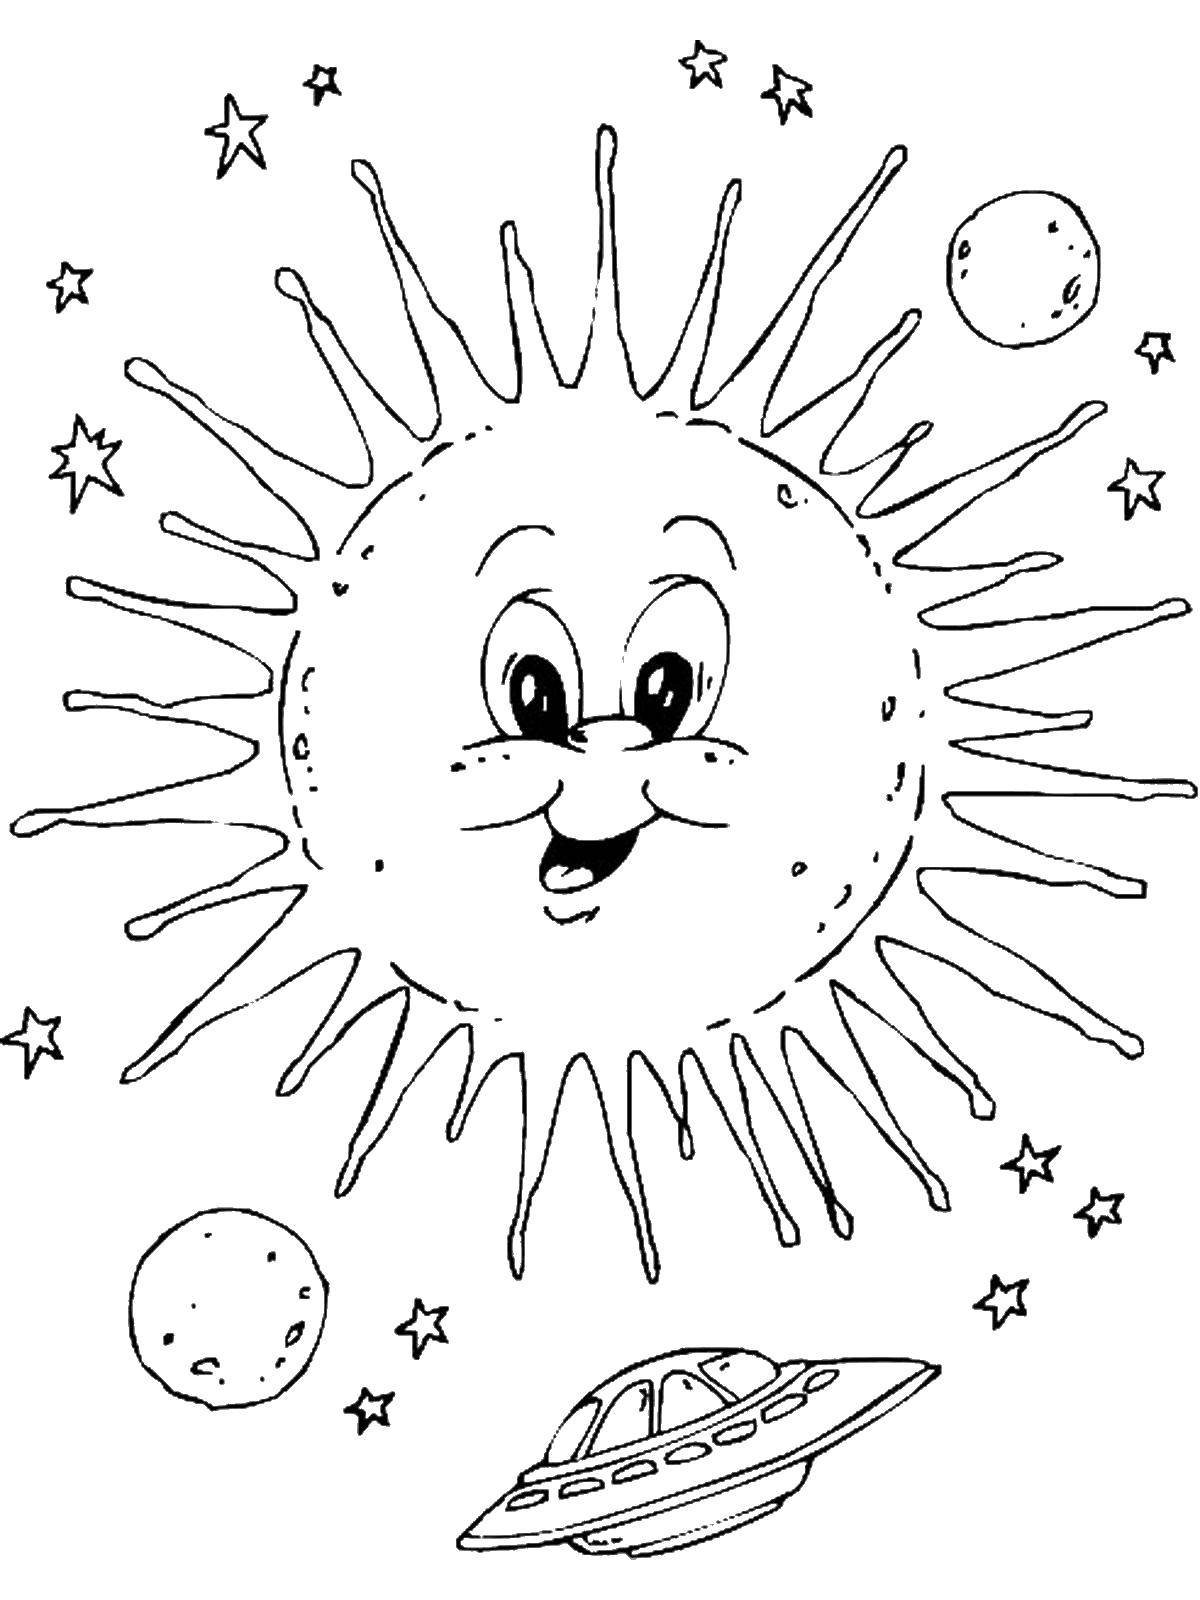 Coloring The sun in space. Category Space coloring pages. Tags:  Space, planet, universe, Galaxy.